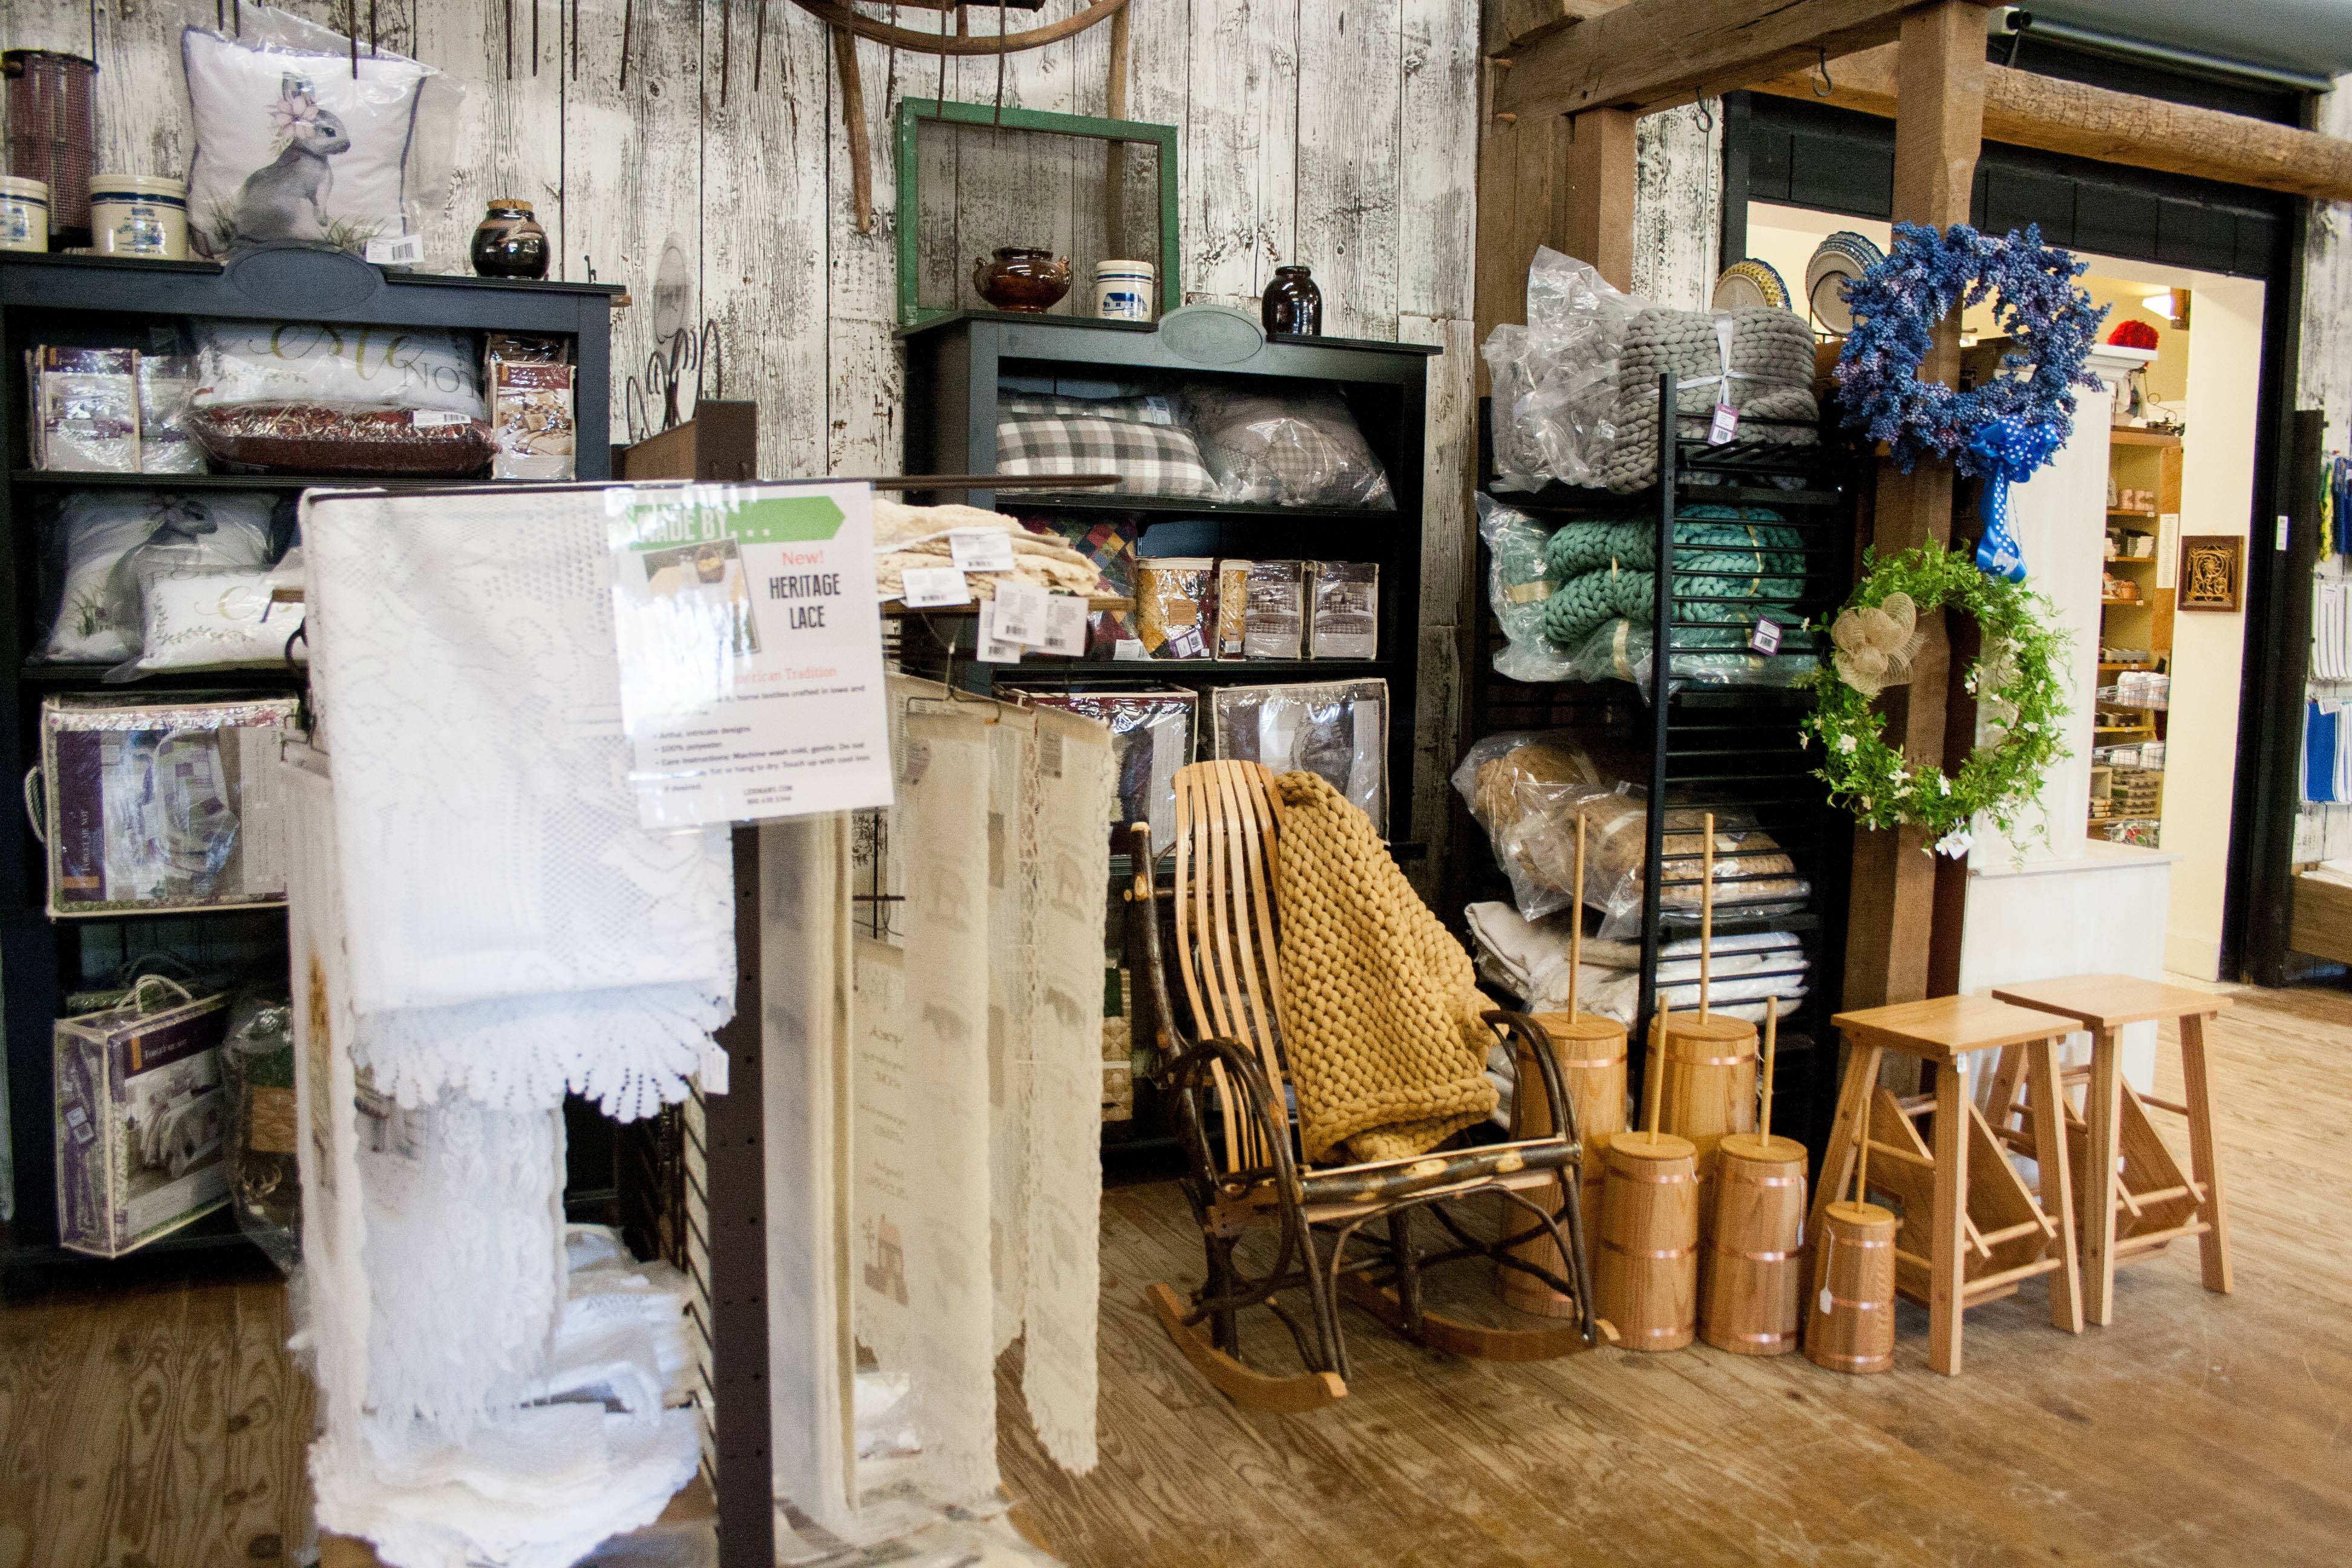 Dazzle guests in your home with beautiful handcrafted furniture and wall decor, or keep them warm with Amish-made blankets and pillows